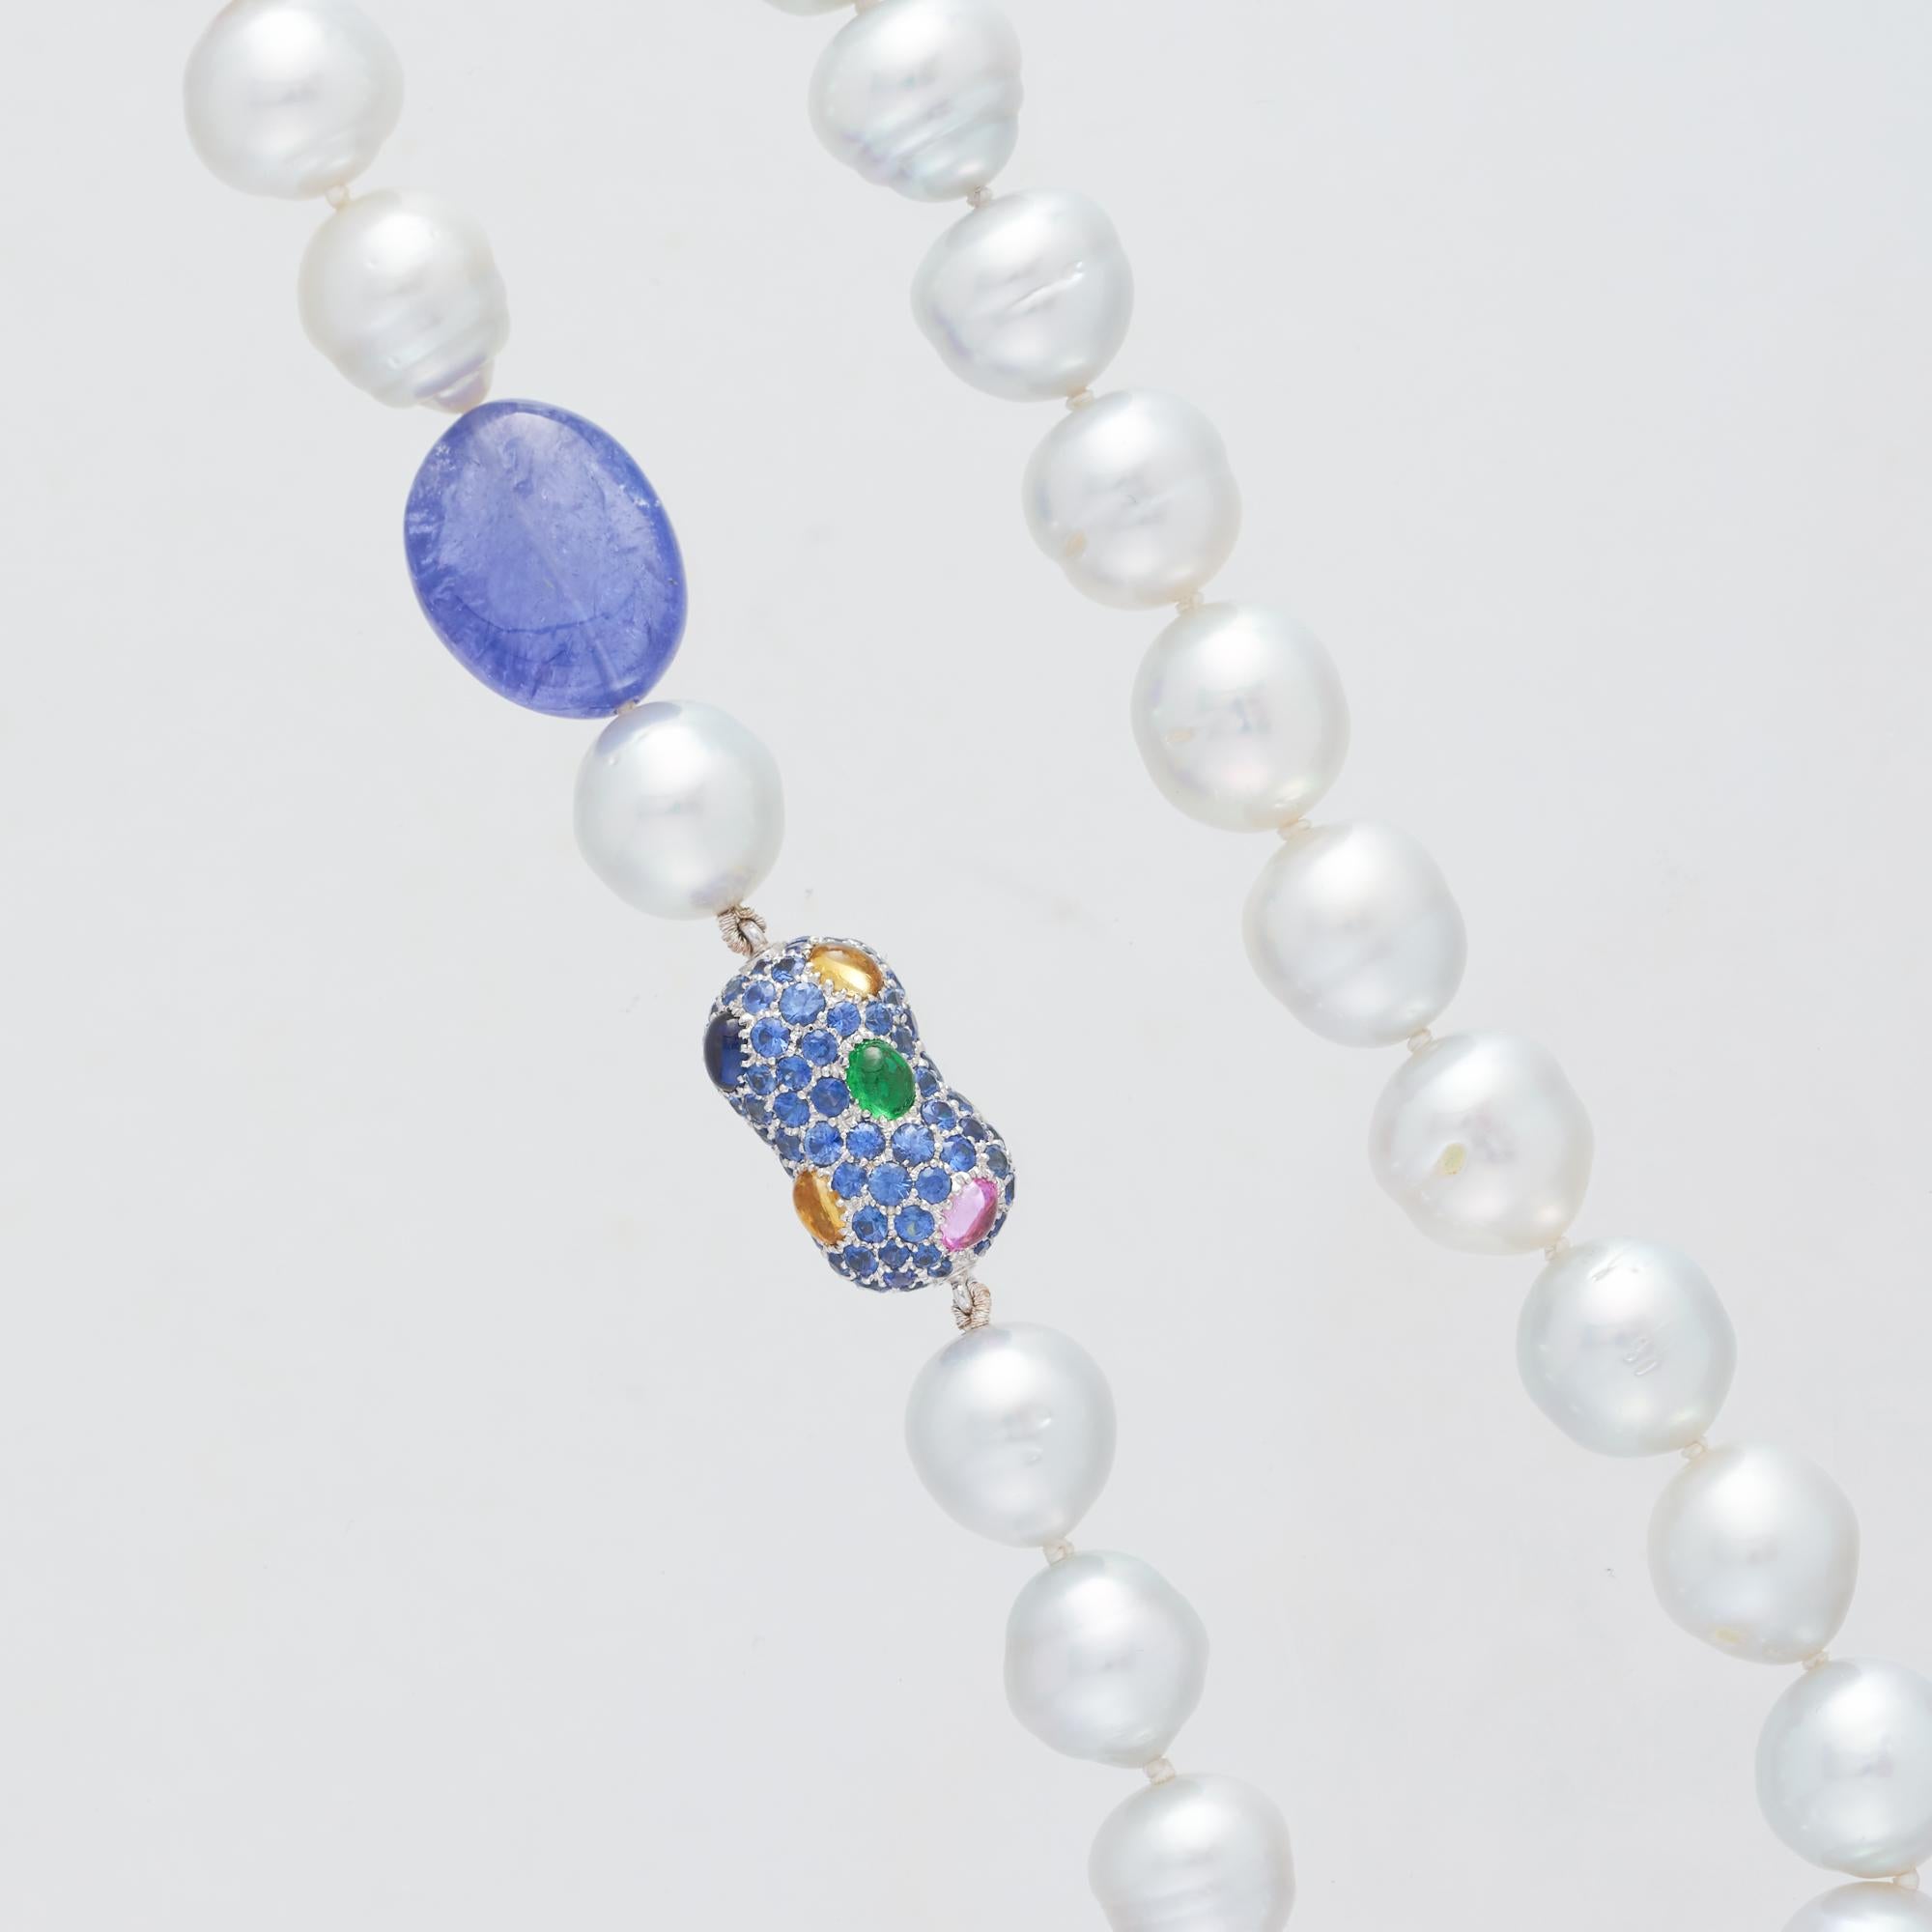 South Sea Pearl and Tanzanite Necklet, 49.50cm long, featuring thirty-nine 10 - 12mm silver white baroque Australian pearls, one Tanzanite bead, one 18 karat white gold diamond and precious stone set 'peanut' enhancer and finished with an 18 karat